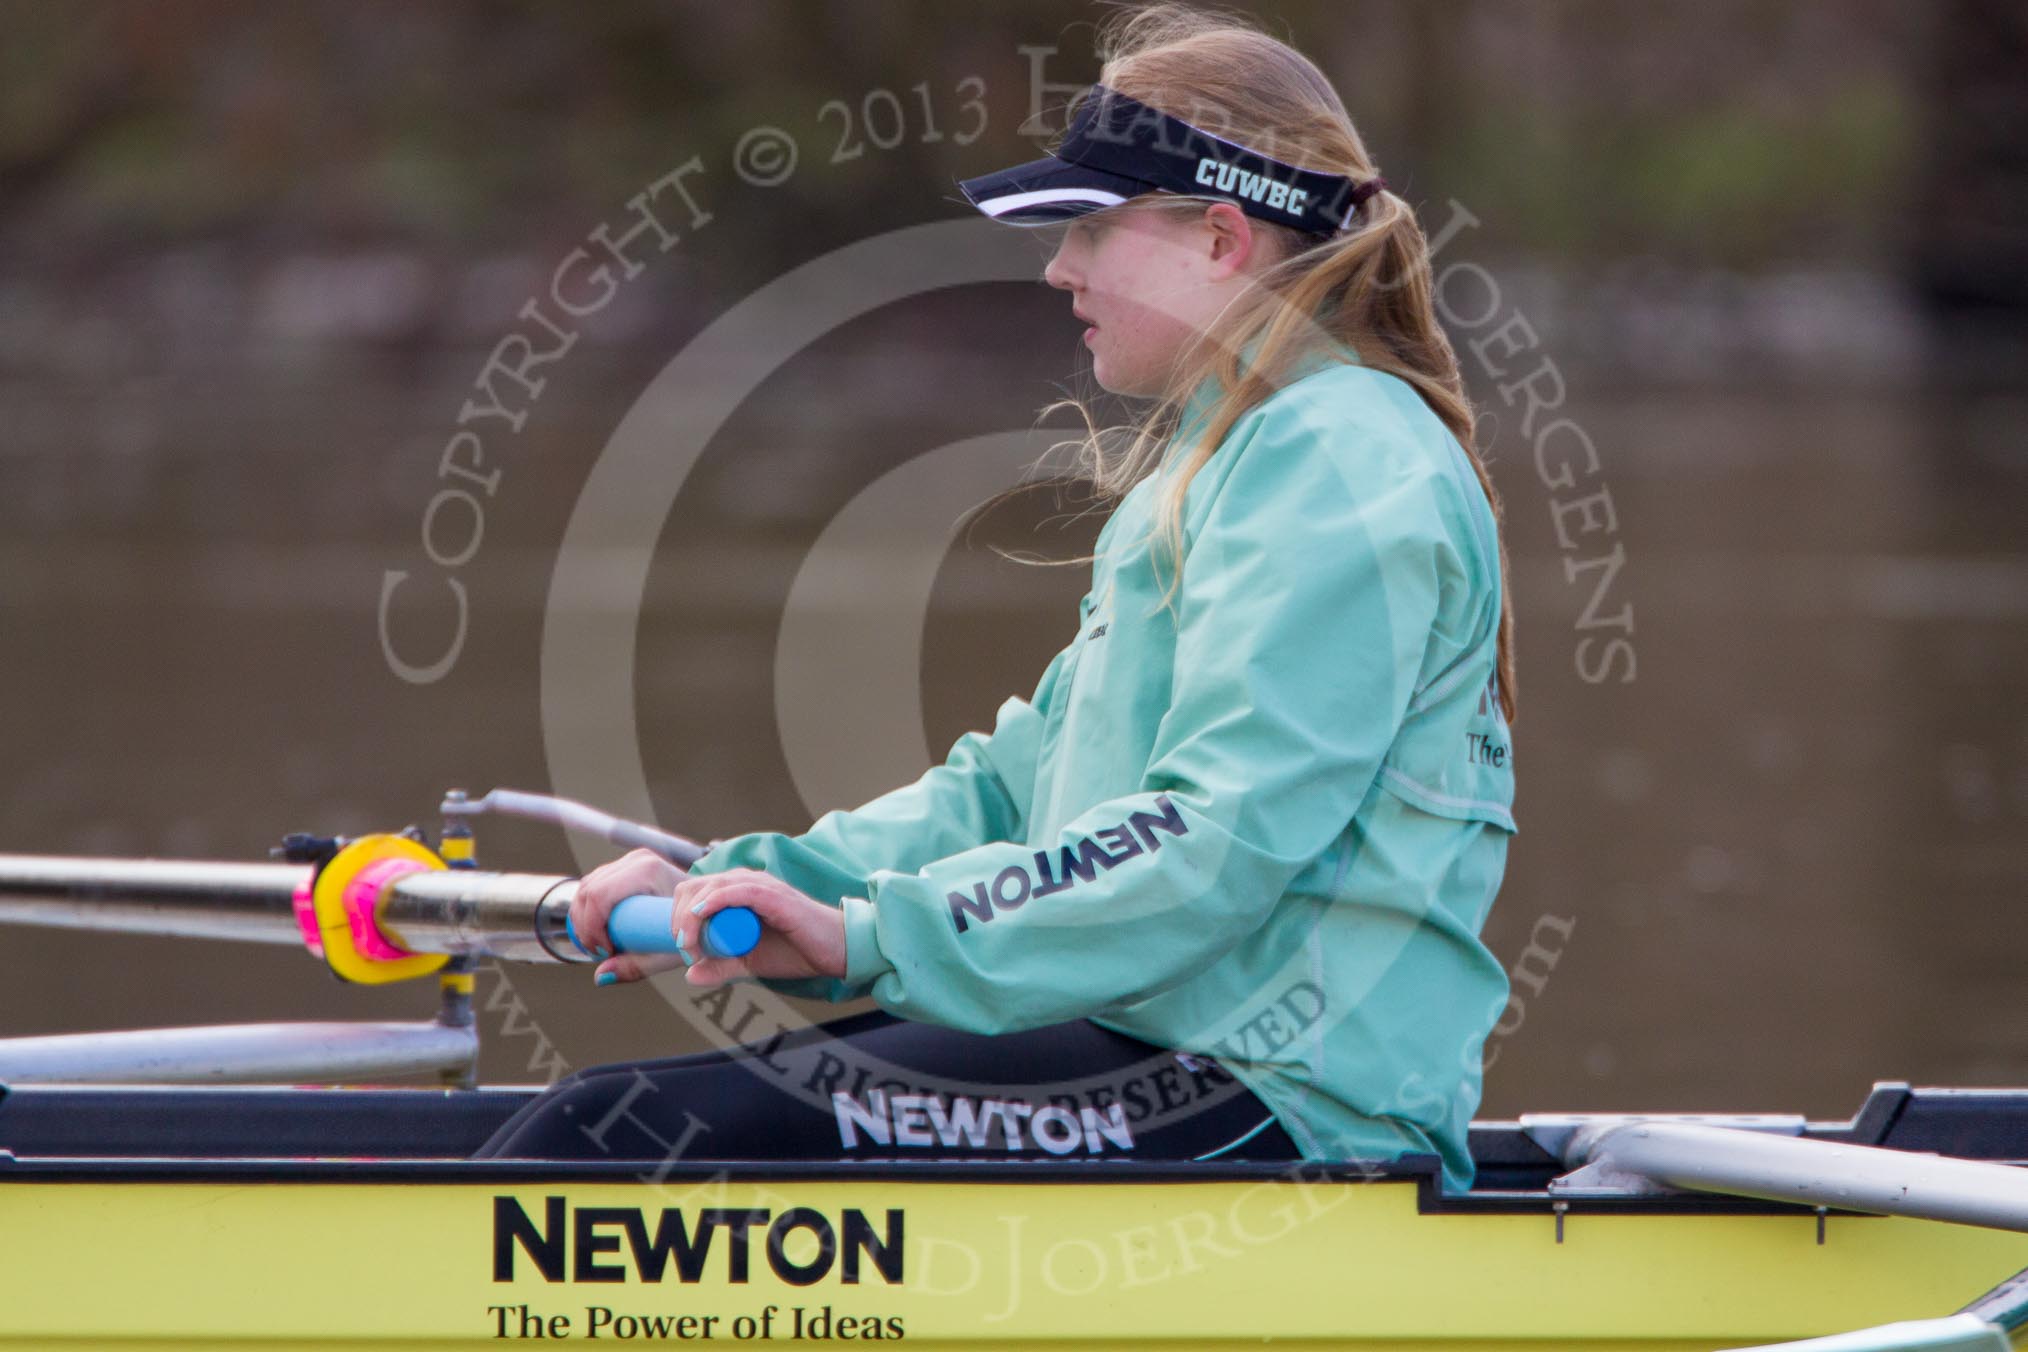 The Boat Race season 2013 - CUWBC training: The CUWBC reserve boat Blondie, in the 2 seat Anita Slotala..
River Thames near Remenham,
Henley-on-Thames,
Oxfordshire,
United Kingdom,
on 19 March 2013 at 15:32, image #29